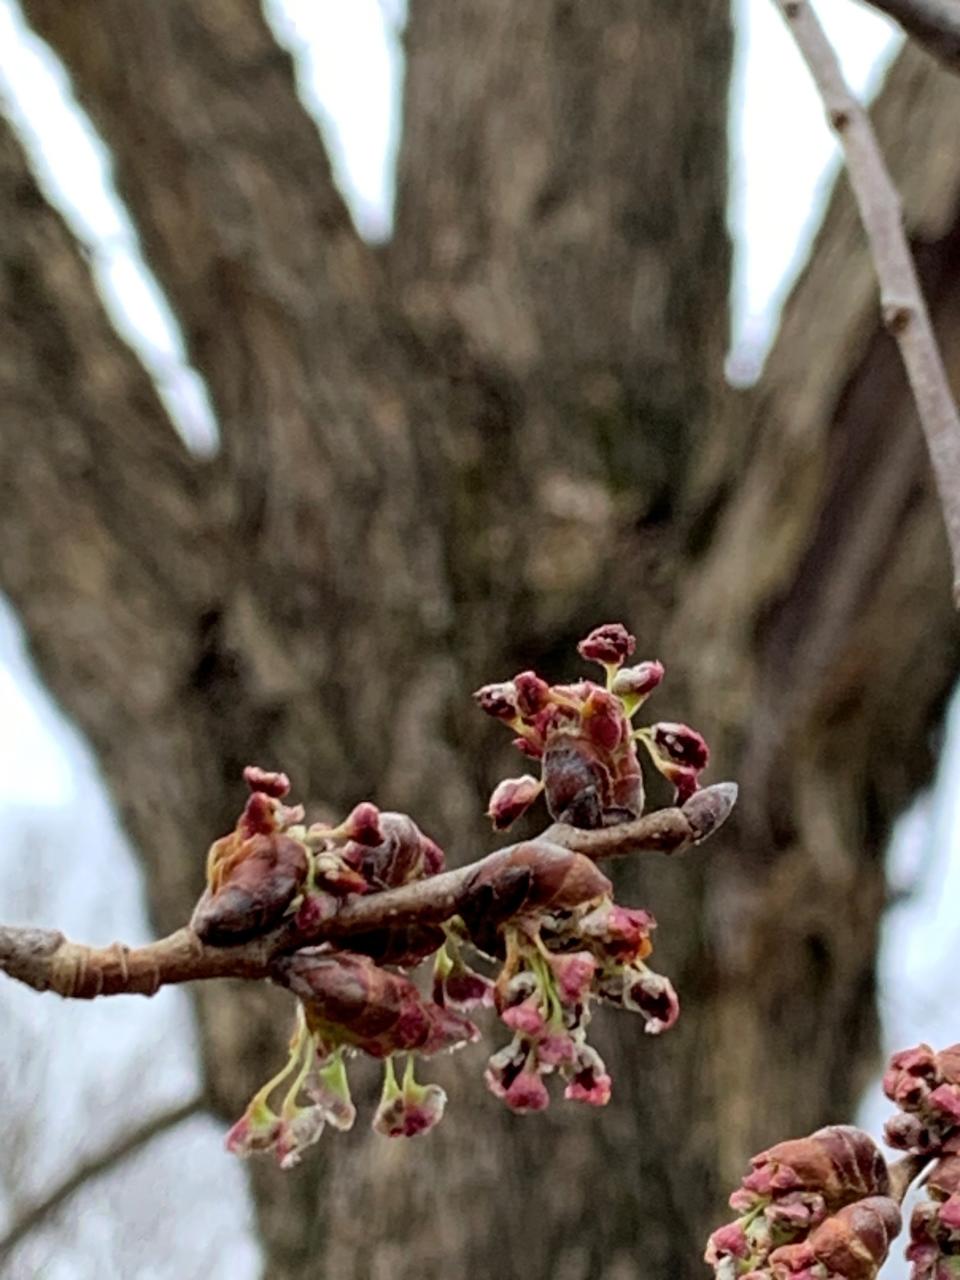 A photo provided by the West Virginia Department of Agriculture shows early Elm tree blooms which department officials say has contributed to a large amount of pollen in the atmosphere.